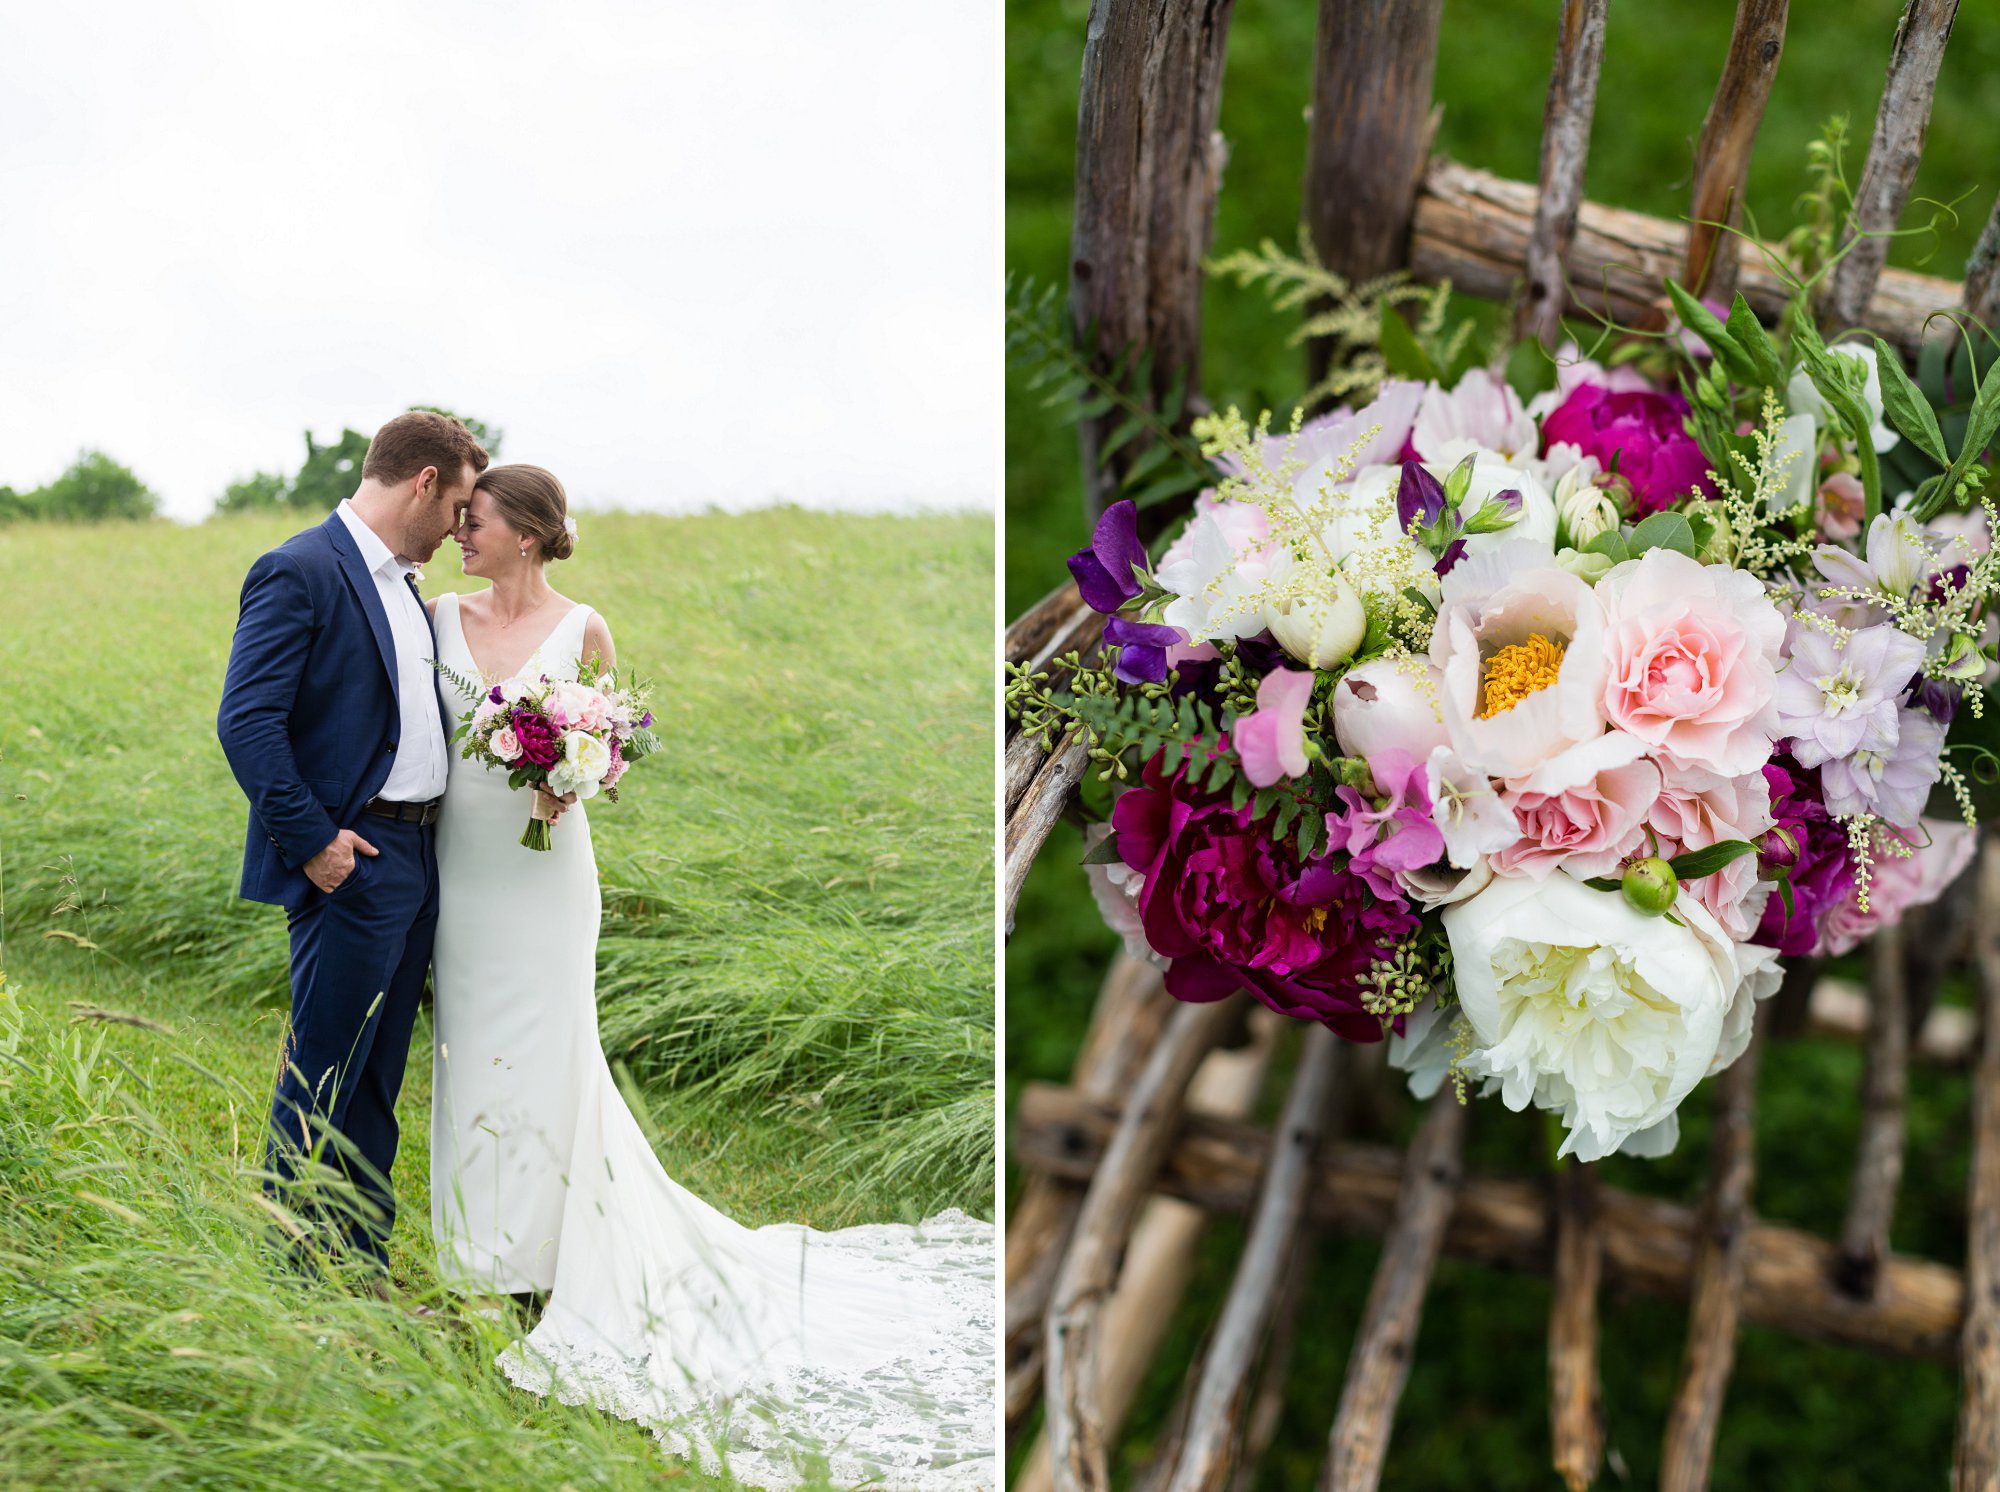 Beautiful July Wedding at The Toad Hill Farm in Franconia, NH | Flowers by Tarrnation Flowers